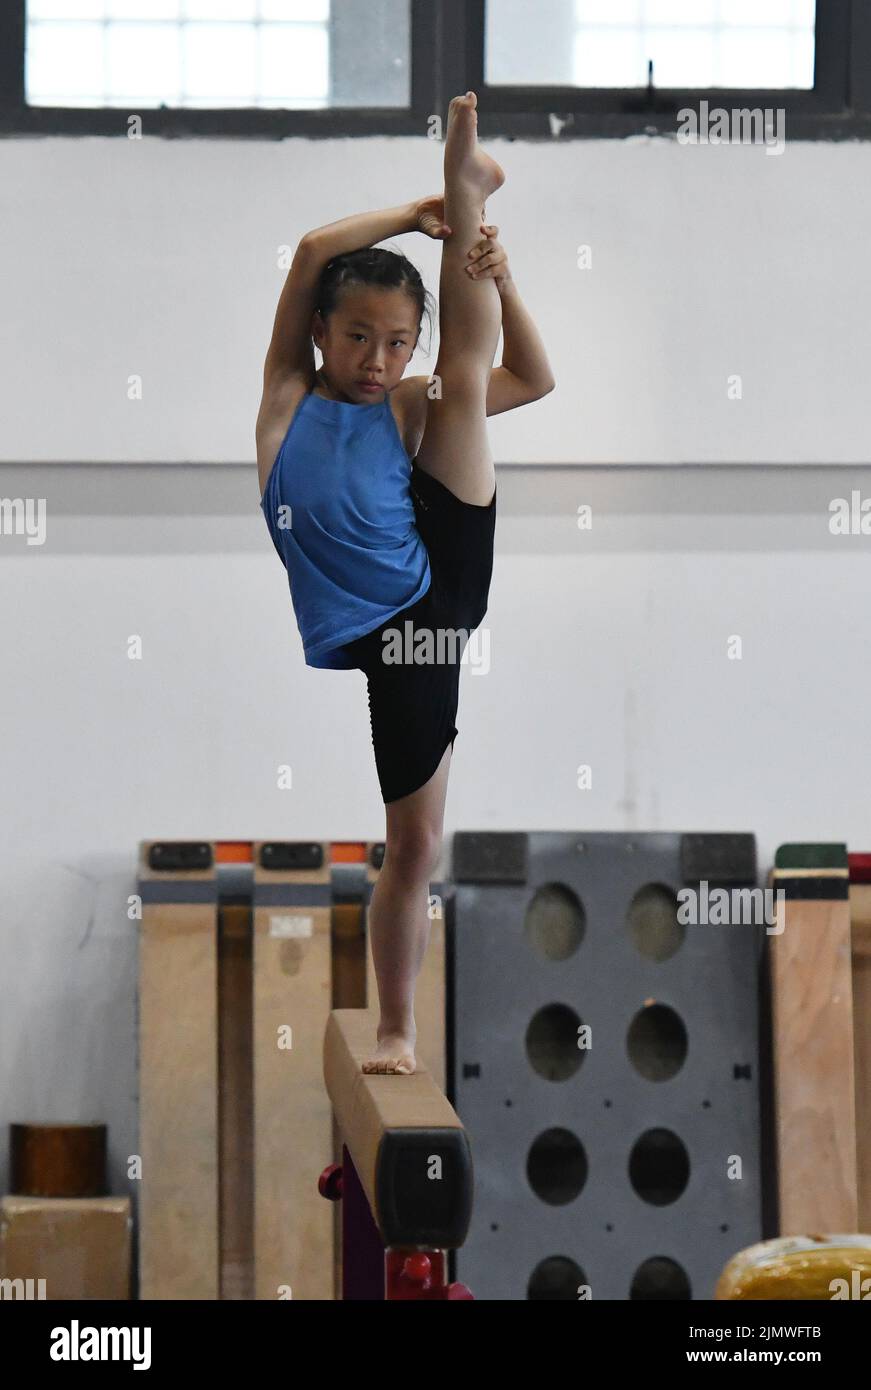 FUYANG, CHINA - AUGUST 7, 2022 - A child practices gymnastics moves at the gymnasium of Fuyang Vocational and Technical College in East China's Anhui Province, Aug 7, 2022. Currently, the team has more than a dozen children between the ages of 5 and 9 doing gymnastics. (Photo by CFOTO/Sipa USA) Stock Photo